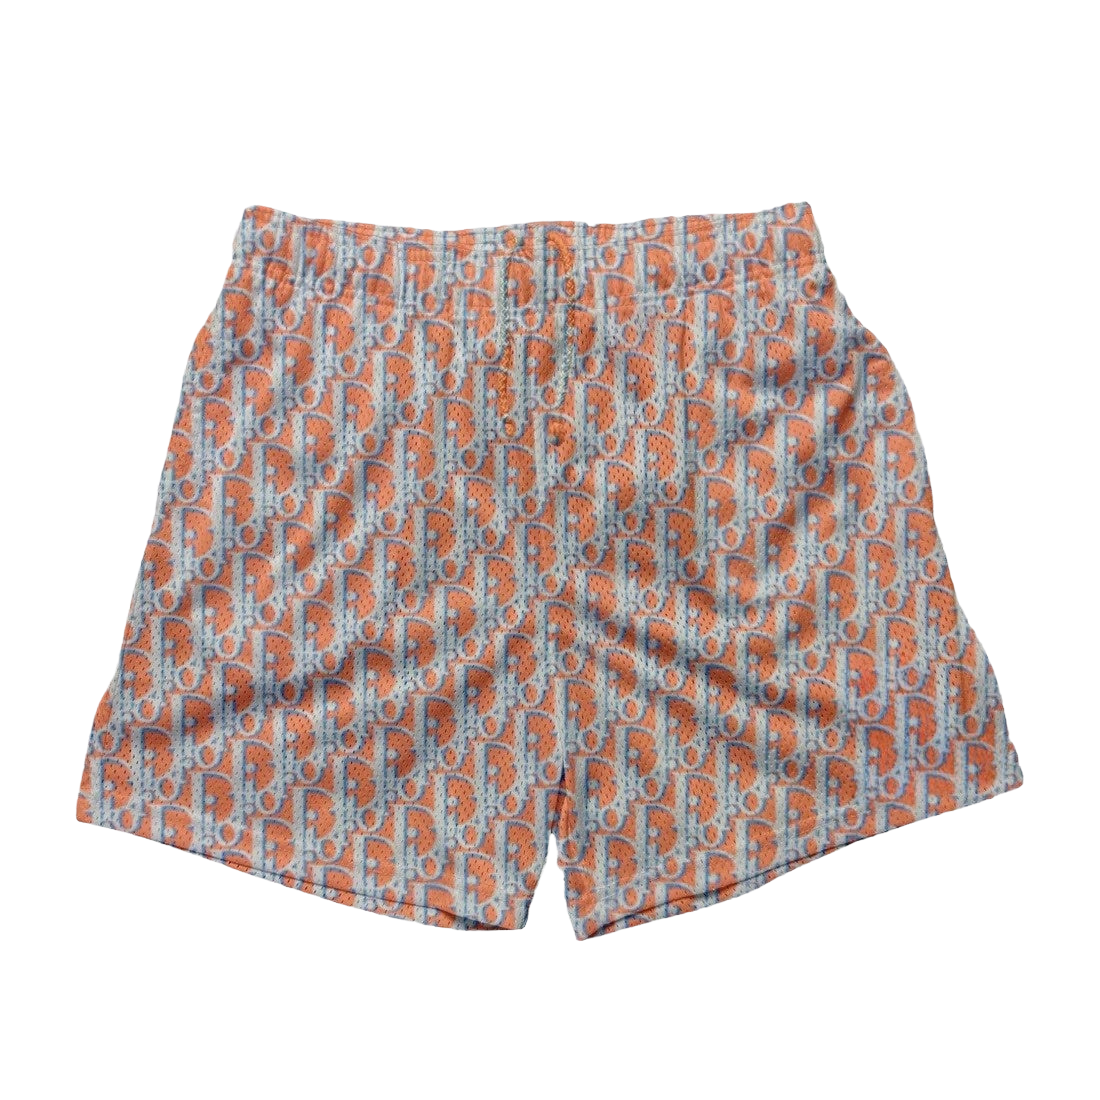 an orange shorts with a blue and white pattern